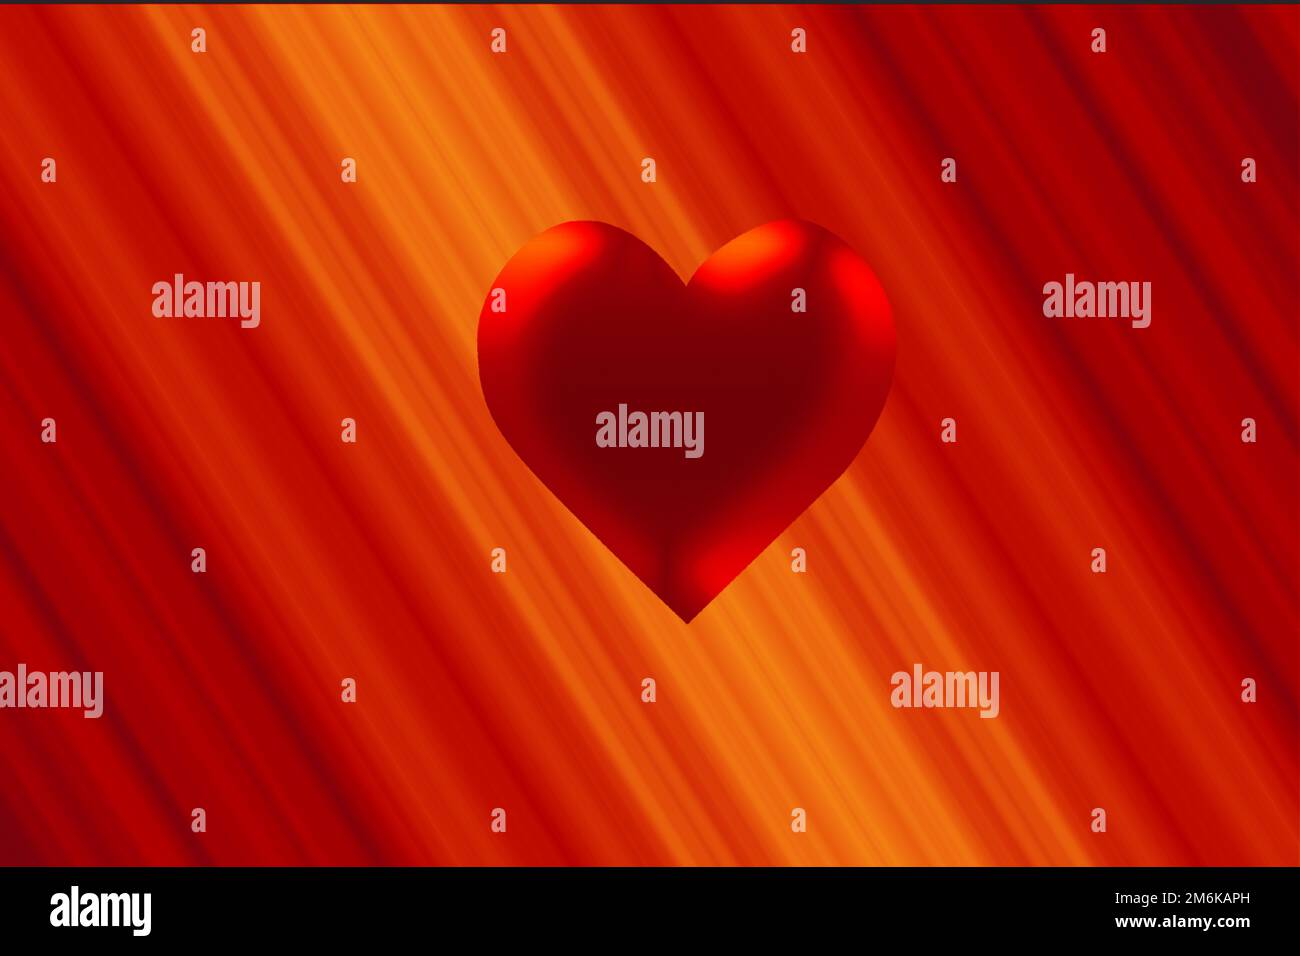 Heart shape as symbol of love and care. Happy Valentines Day heart greeting Stock Photo